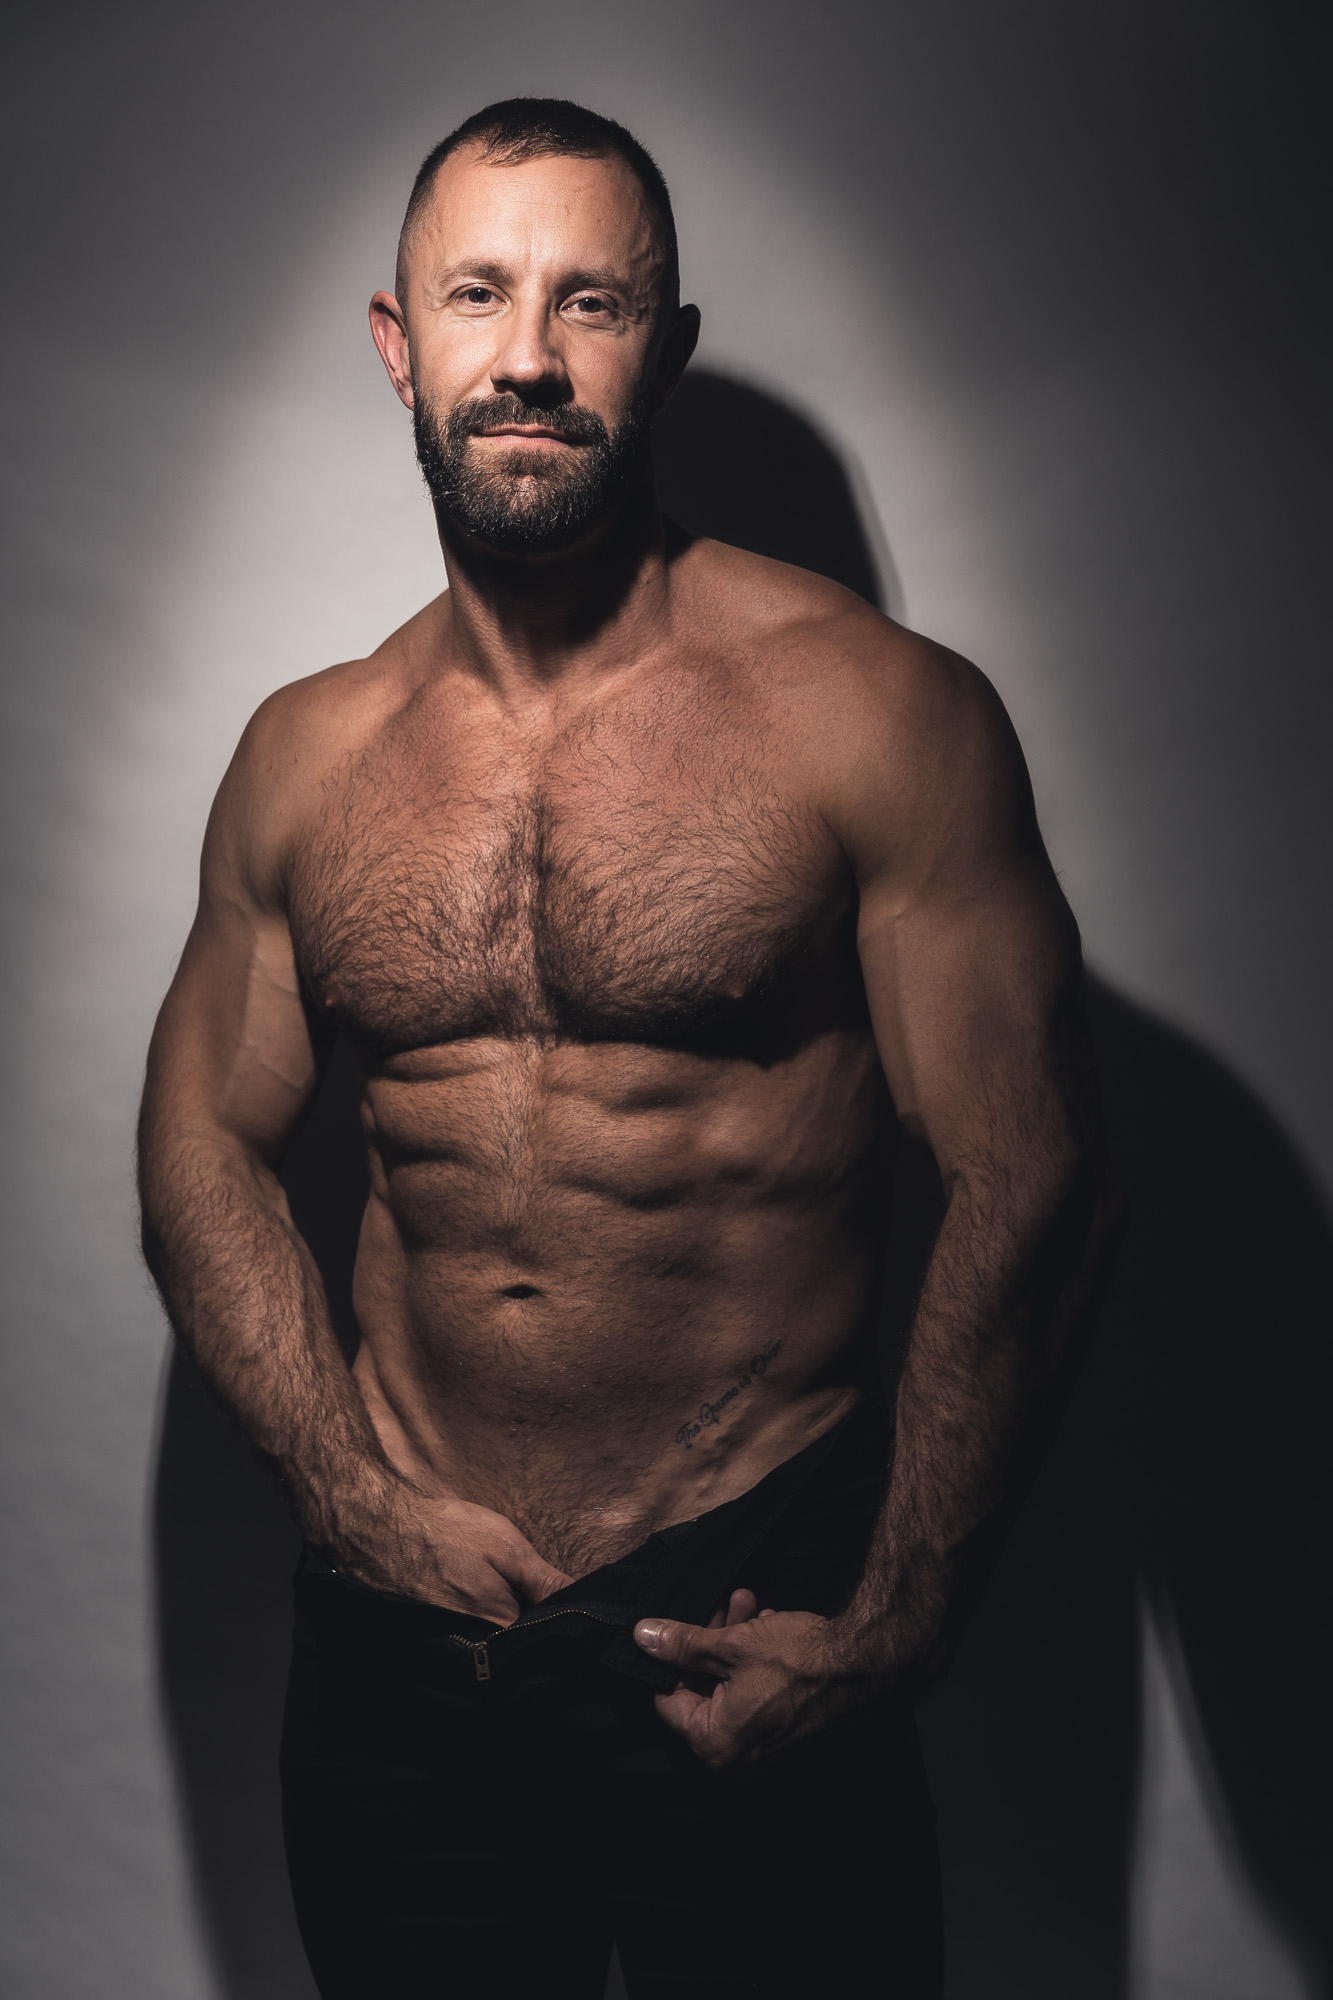 NSFW – Phil by Pierre Monnerville.